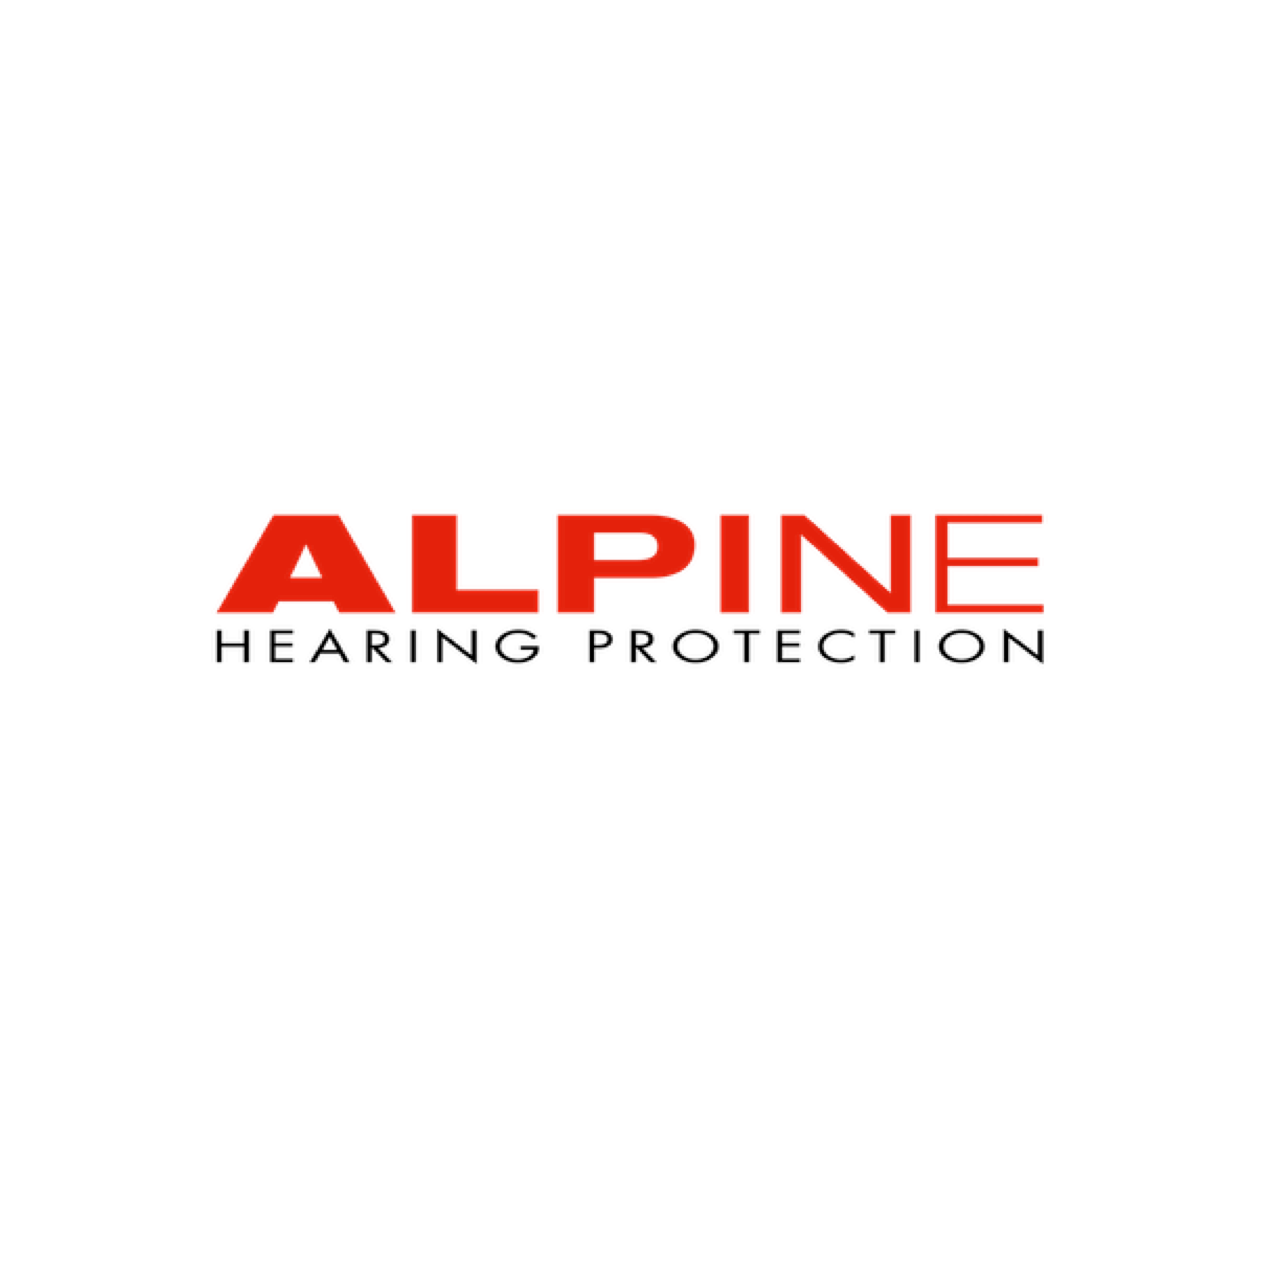 Alpine Hearing Protection